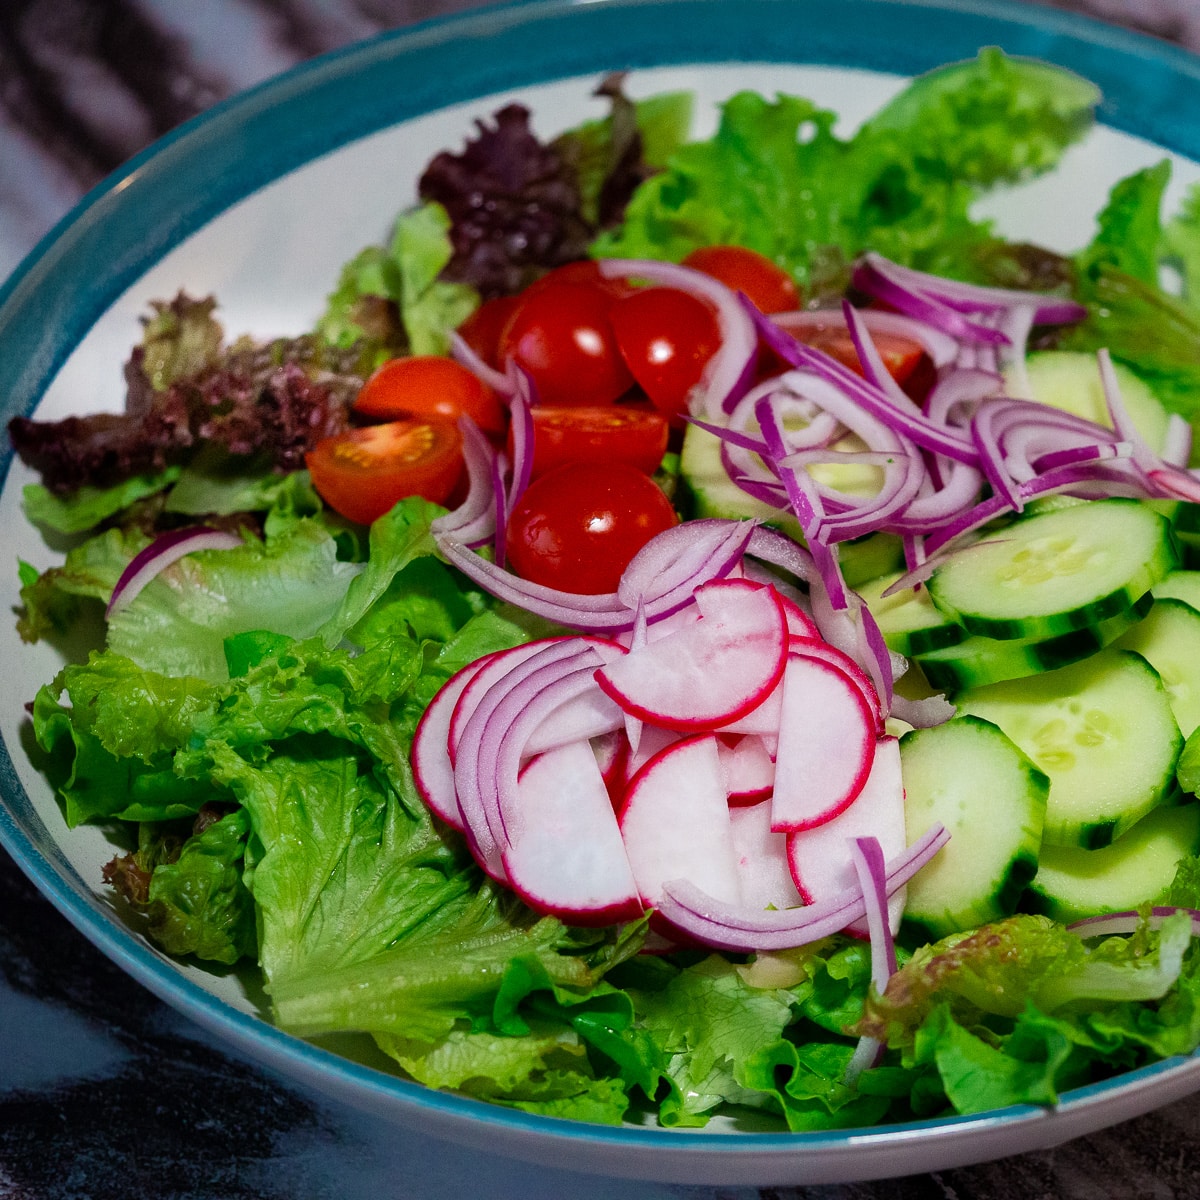 A mix of red and green oakleaf lettuce, cherry tomatoes, sliced raddish, sliced cucumber and sliced red onion in a a large serving bowl.